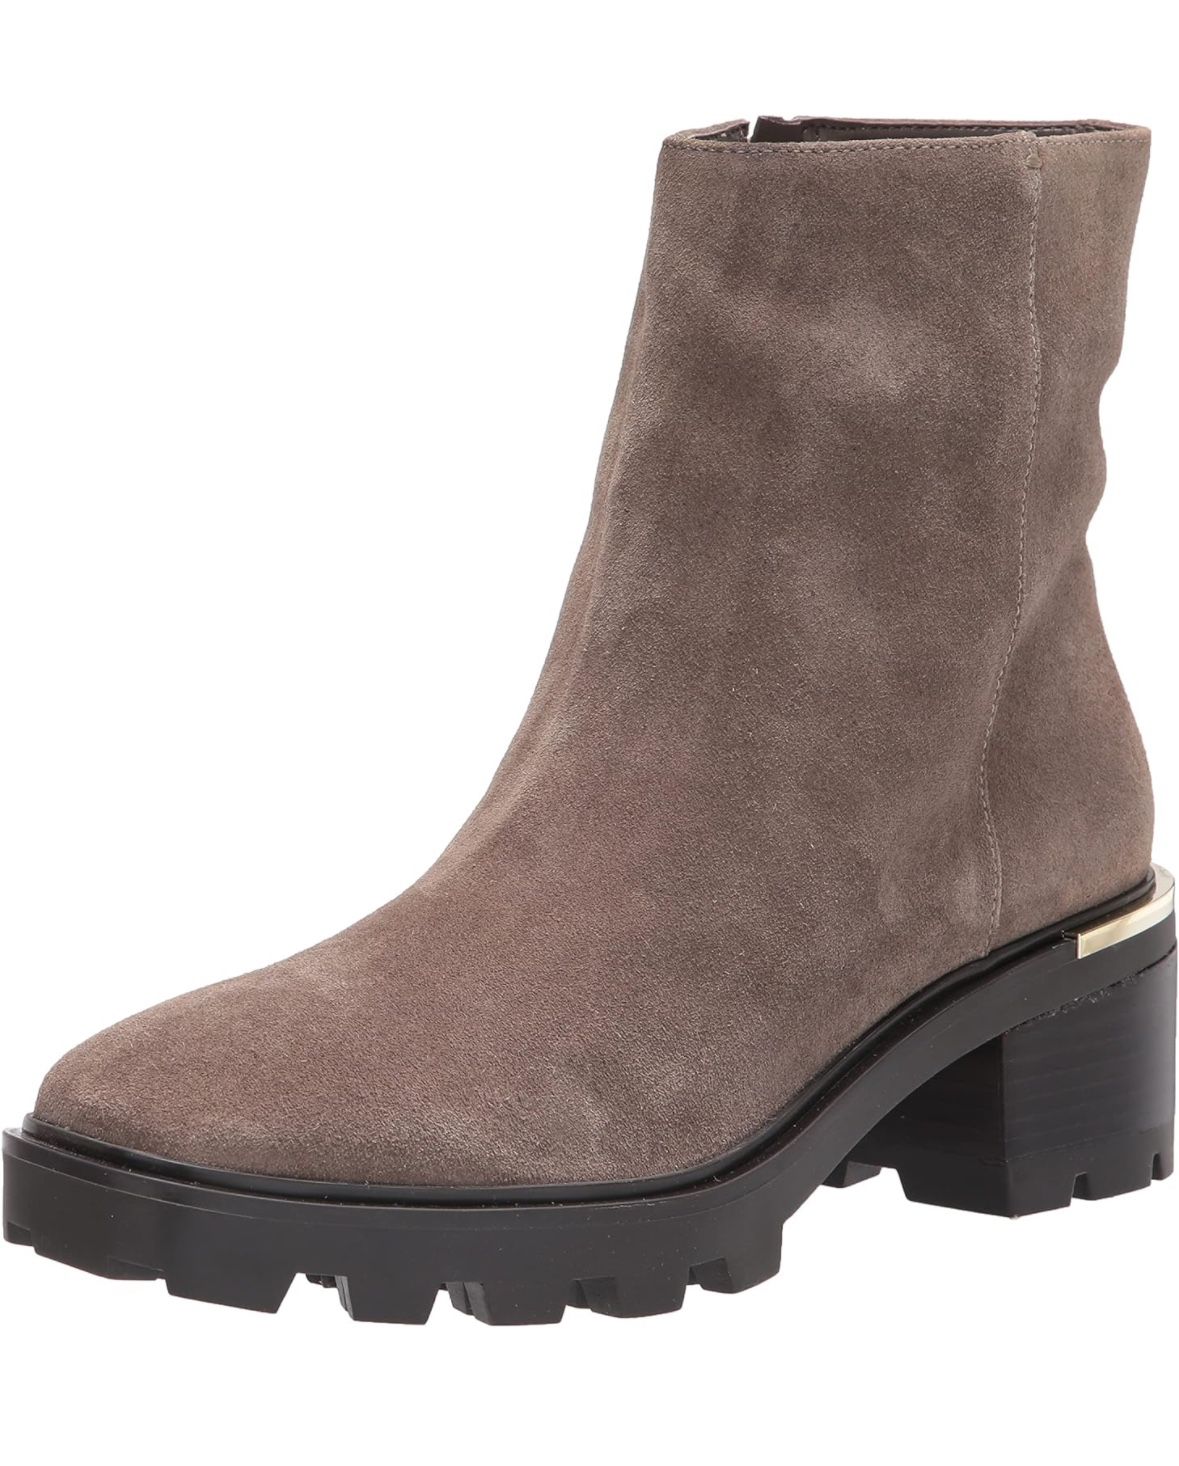 NINE WEST Women's Remmie Ankle Boot